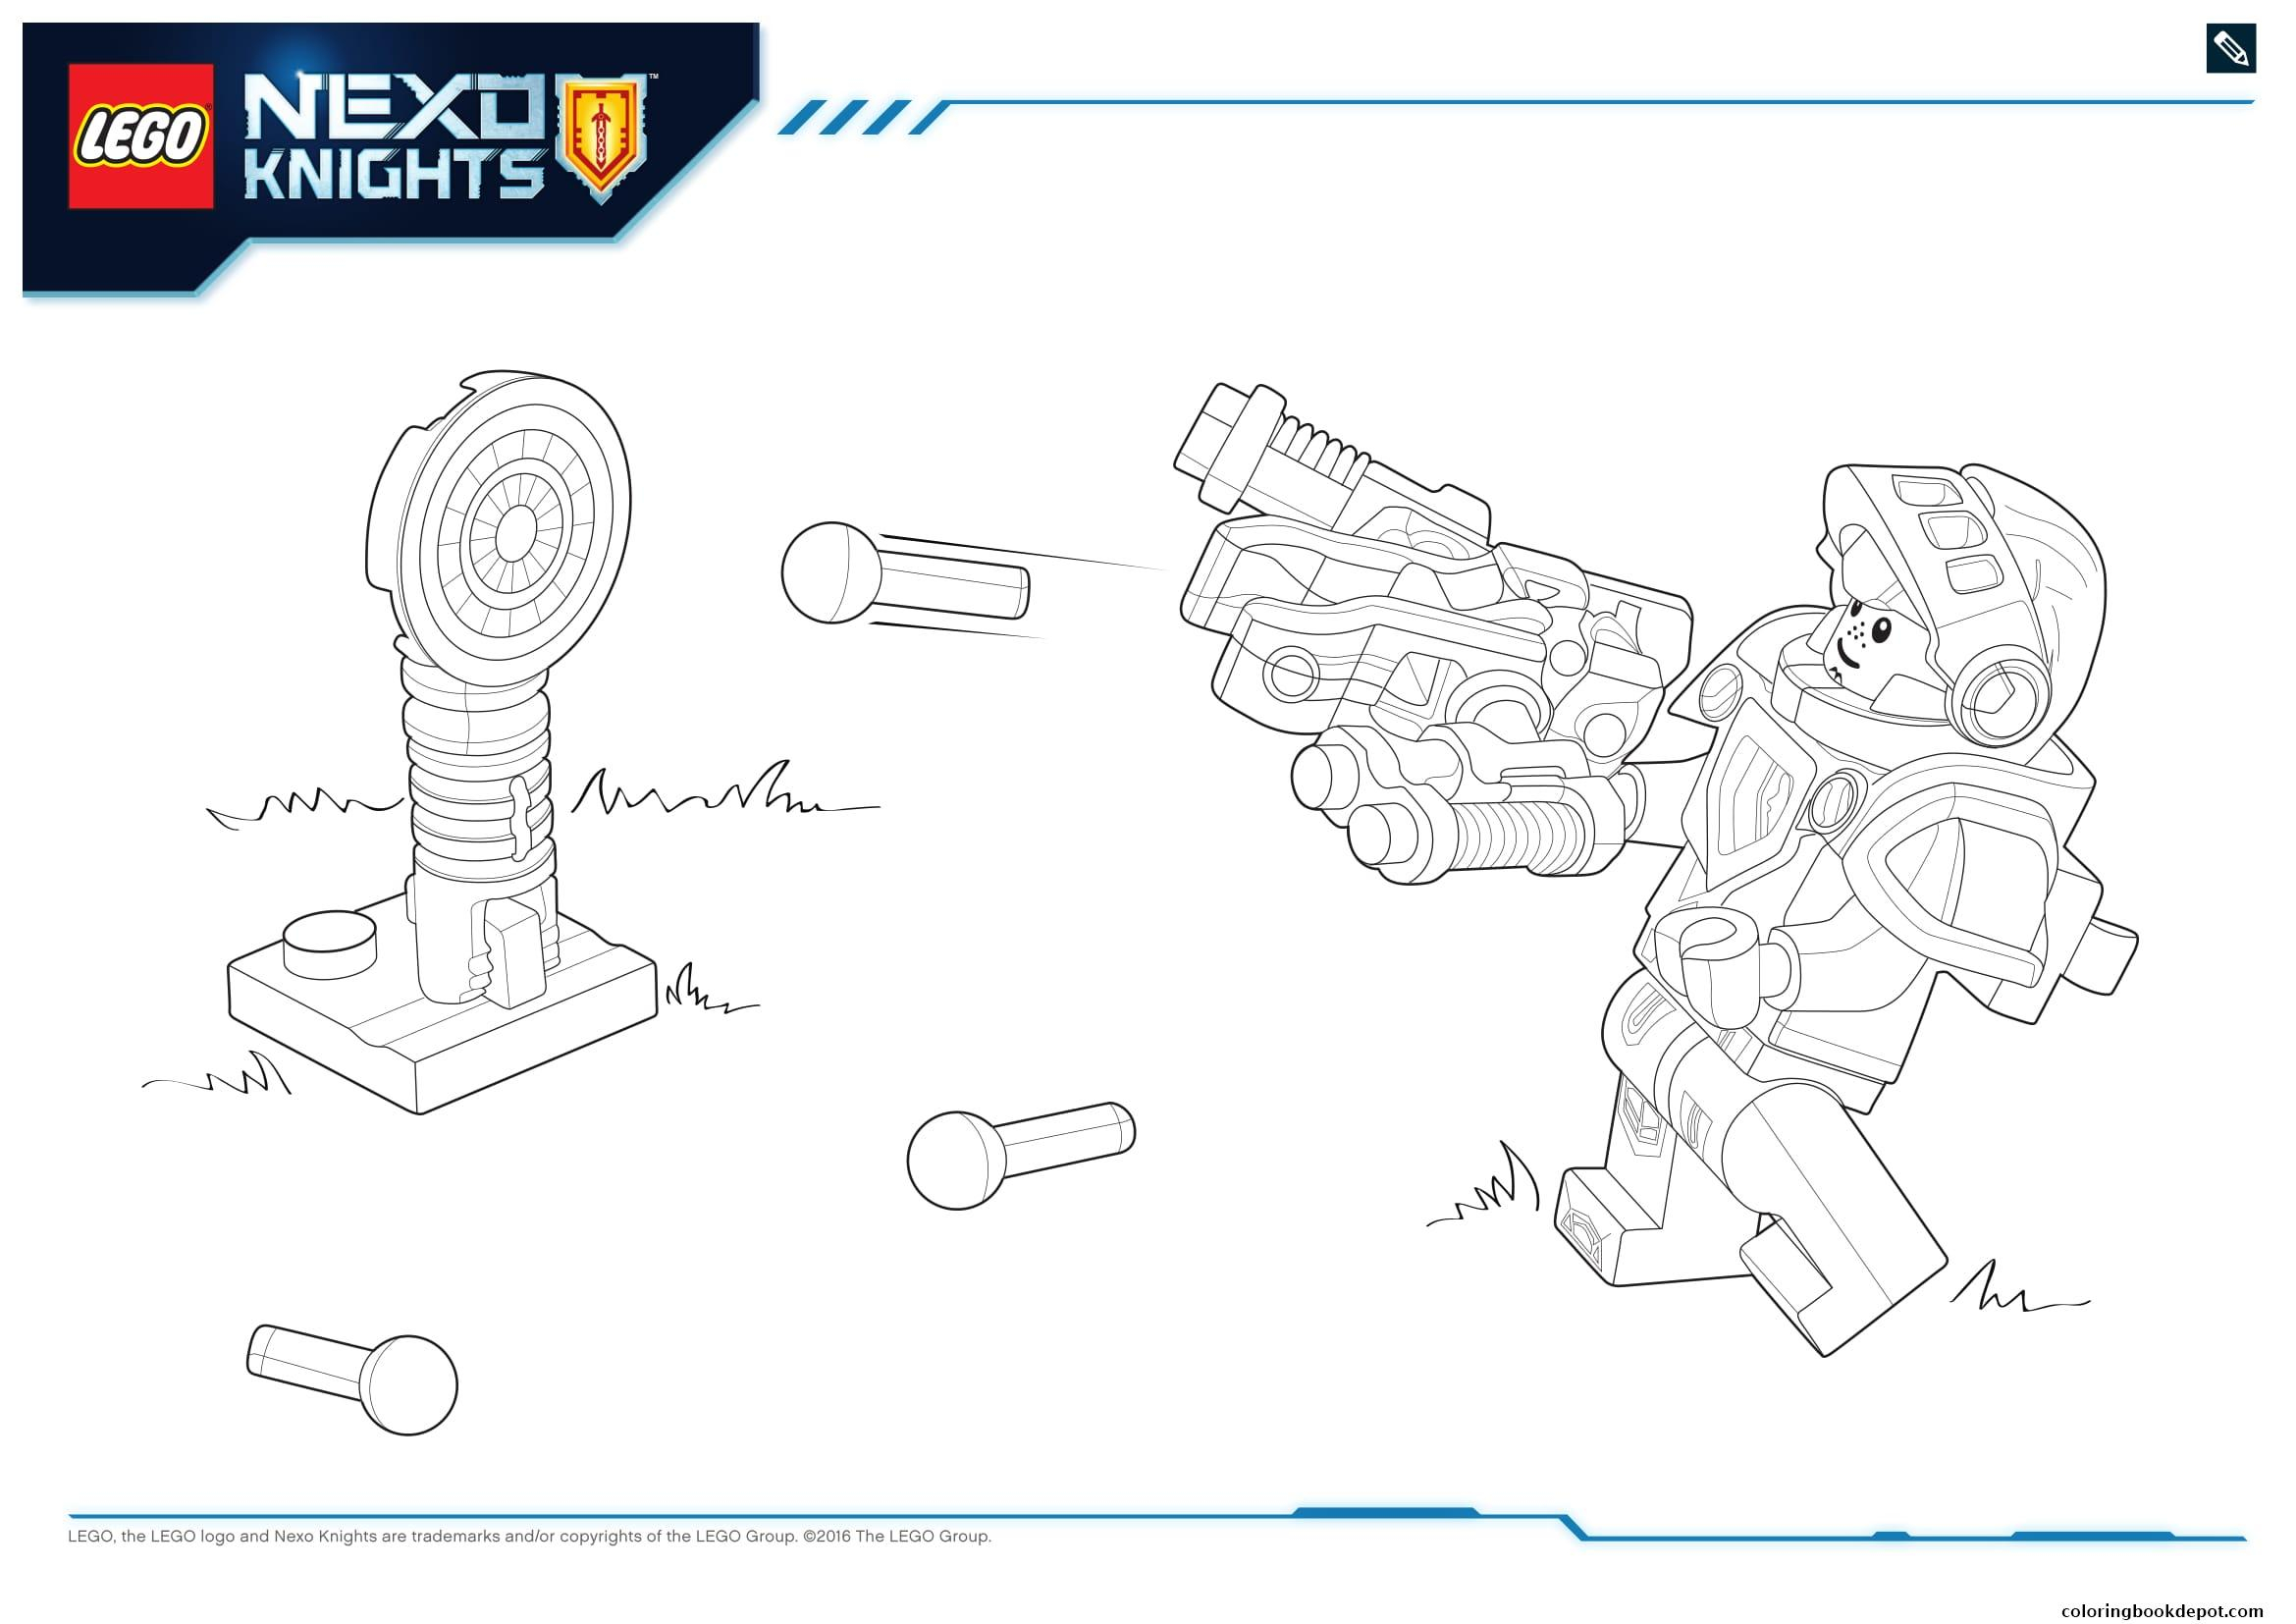 Nexo Knights Coloring Pages Lego Nexo Knights Products 7 Coloring Pages